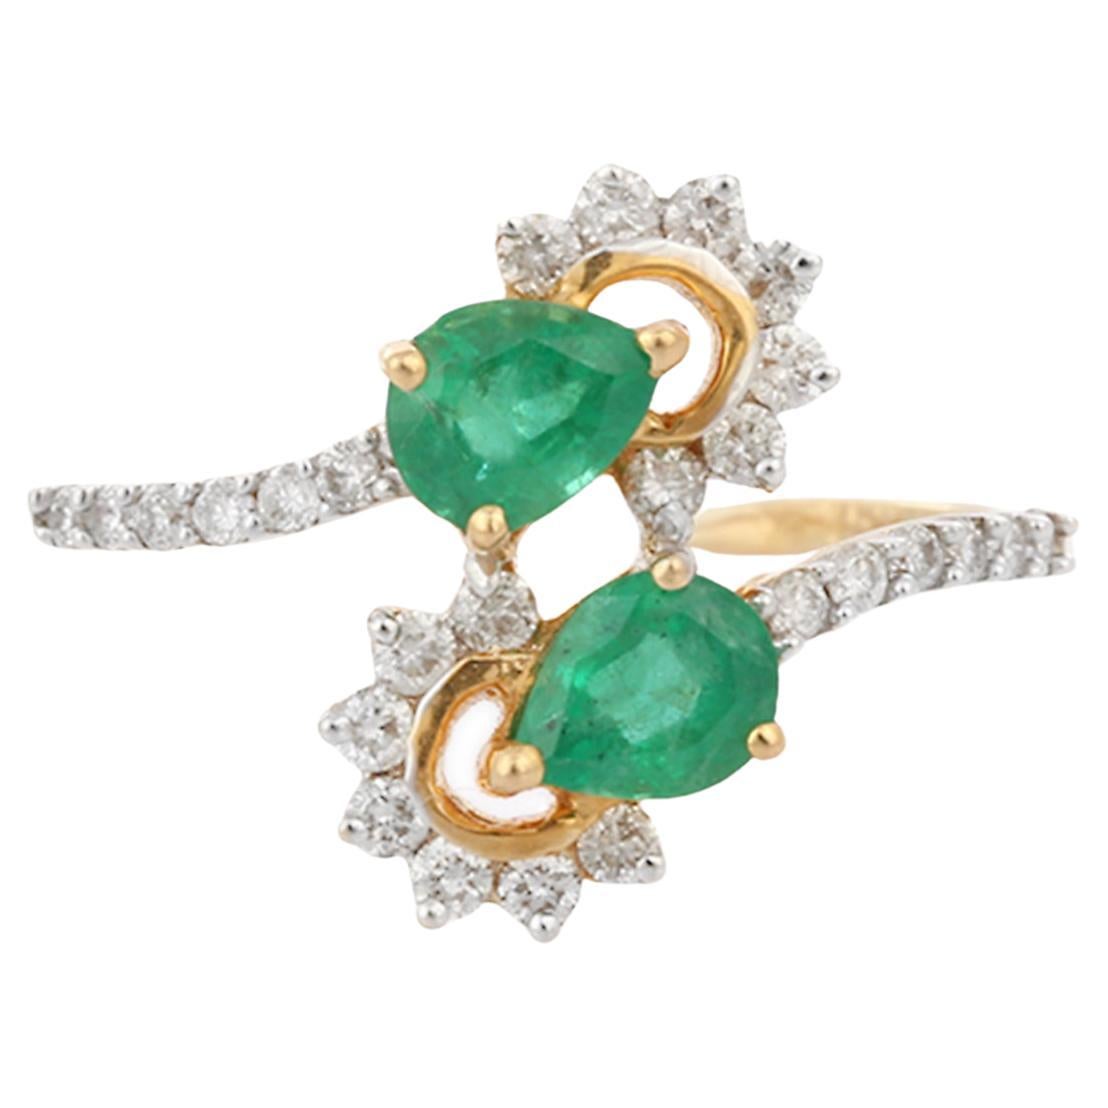 Exquisite Pear Cut Emerald and Diamond Open Ring in 18K Yellow Gold for Her